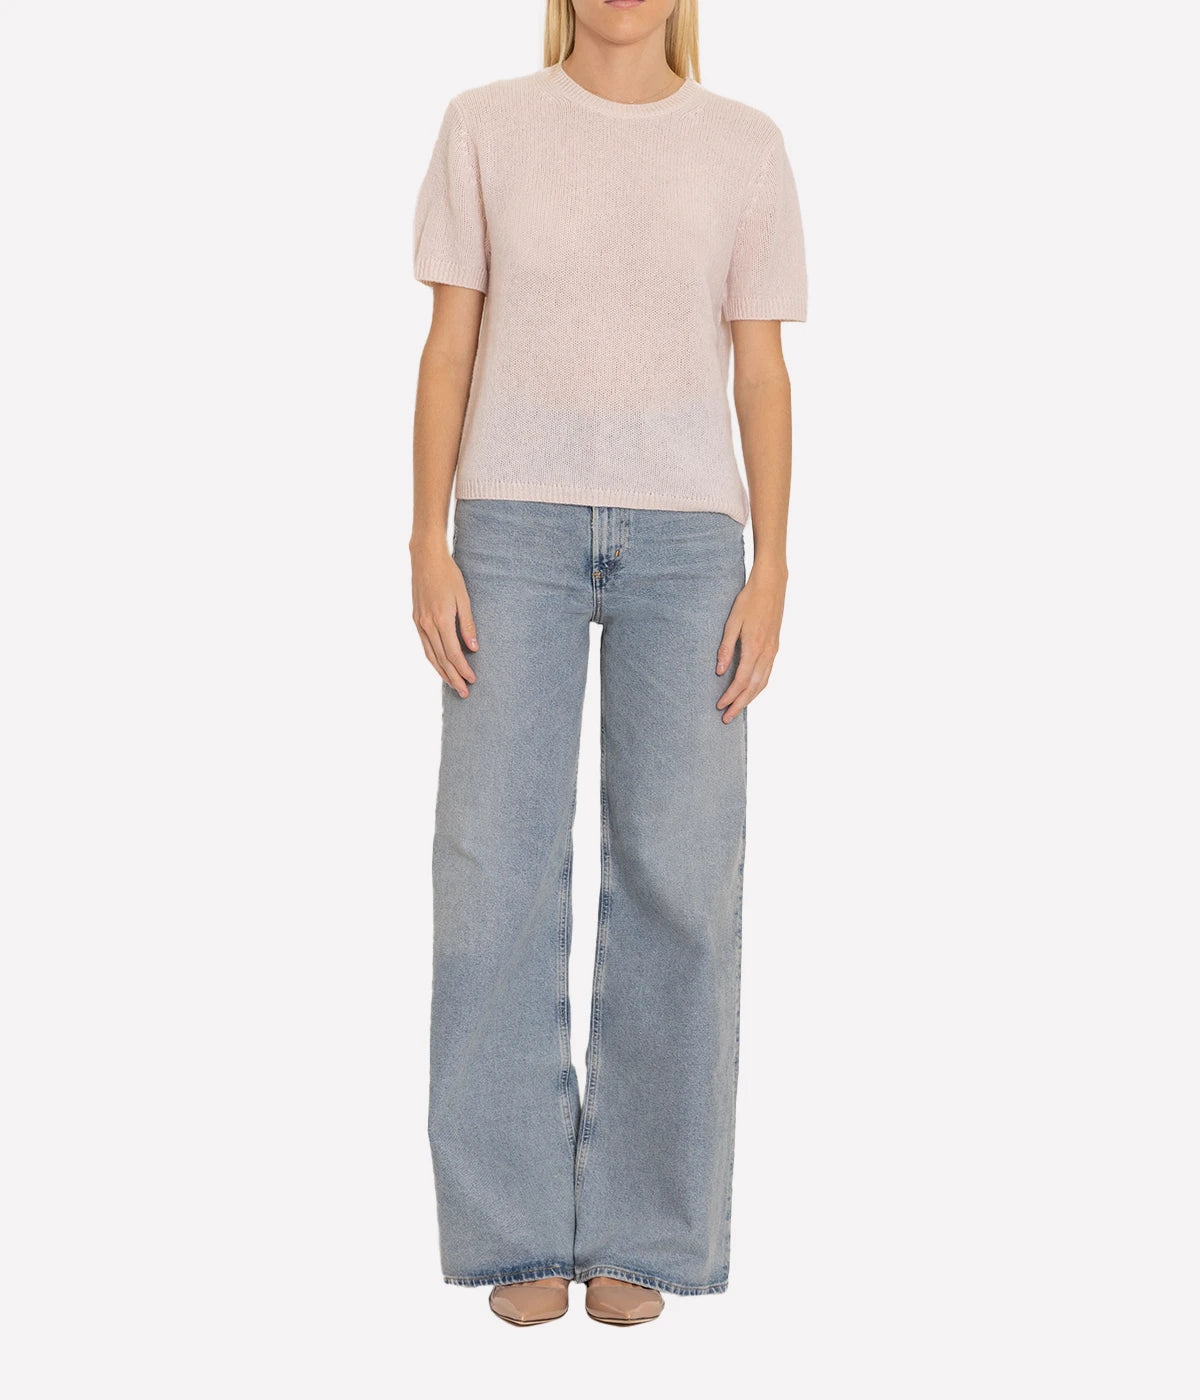 Cashmere Featherweight T-Shirt in Pink Sand